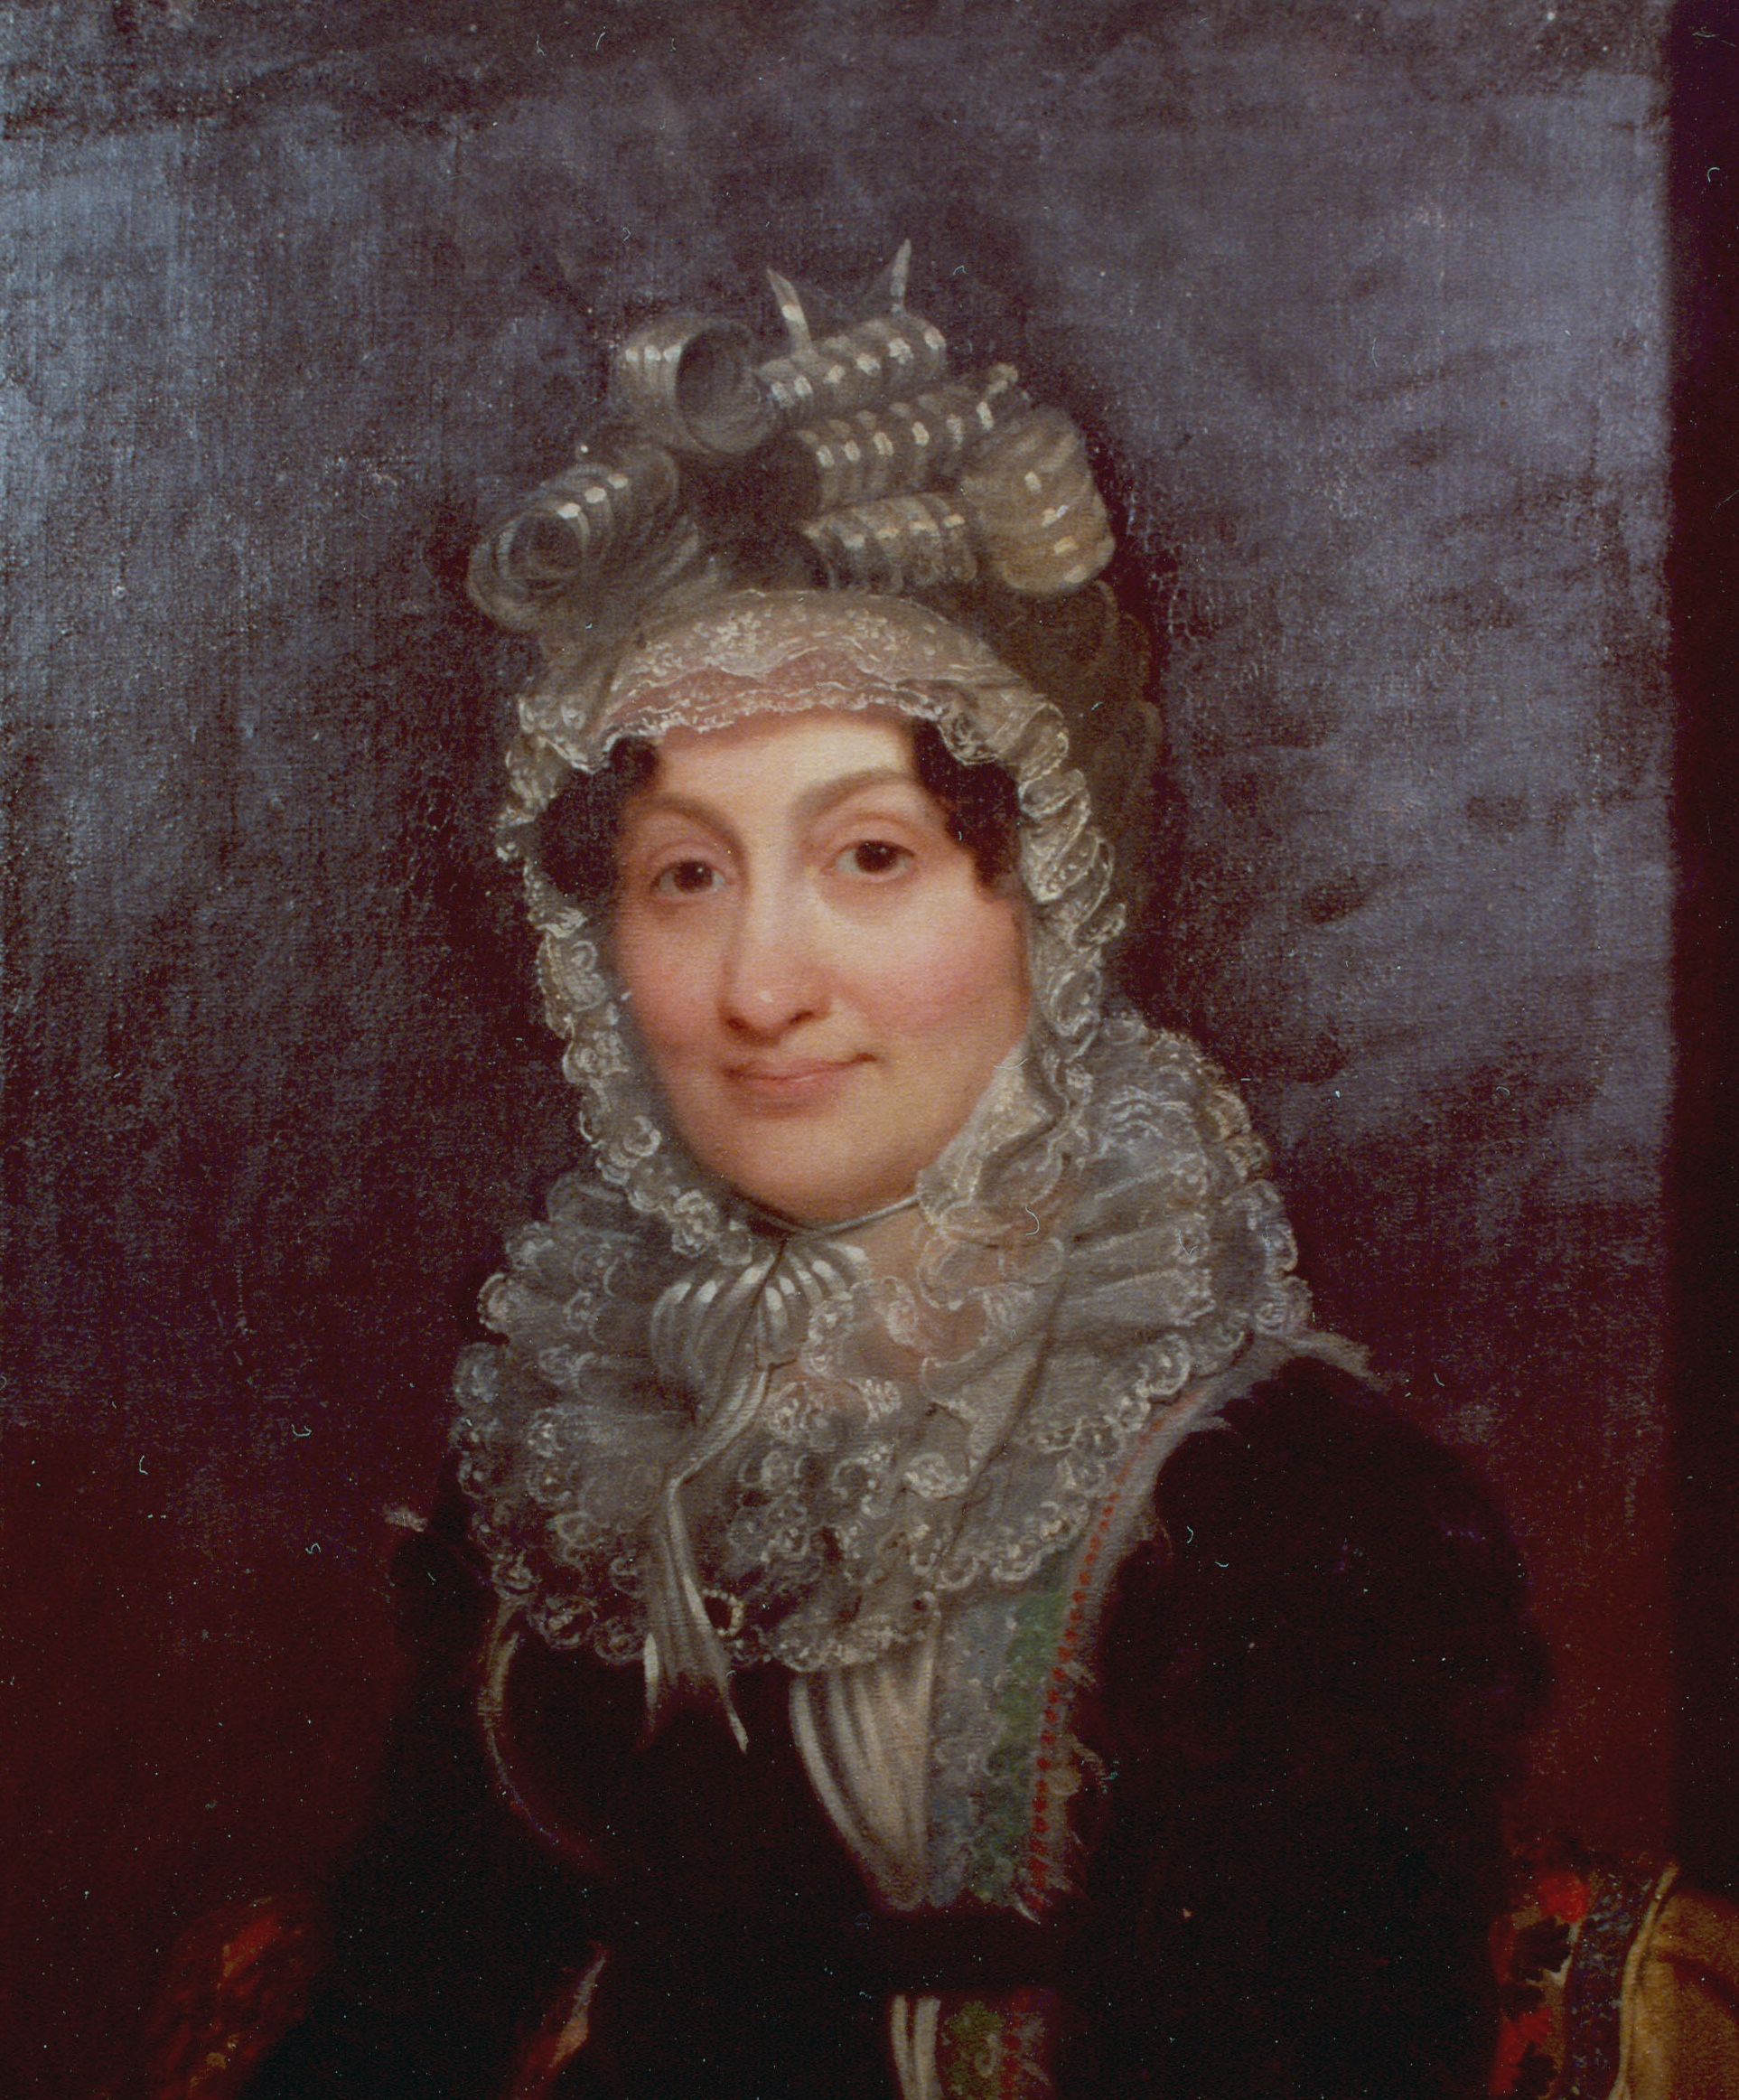 A painting of Hannah Coalter in a bonnet.